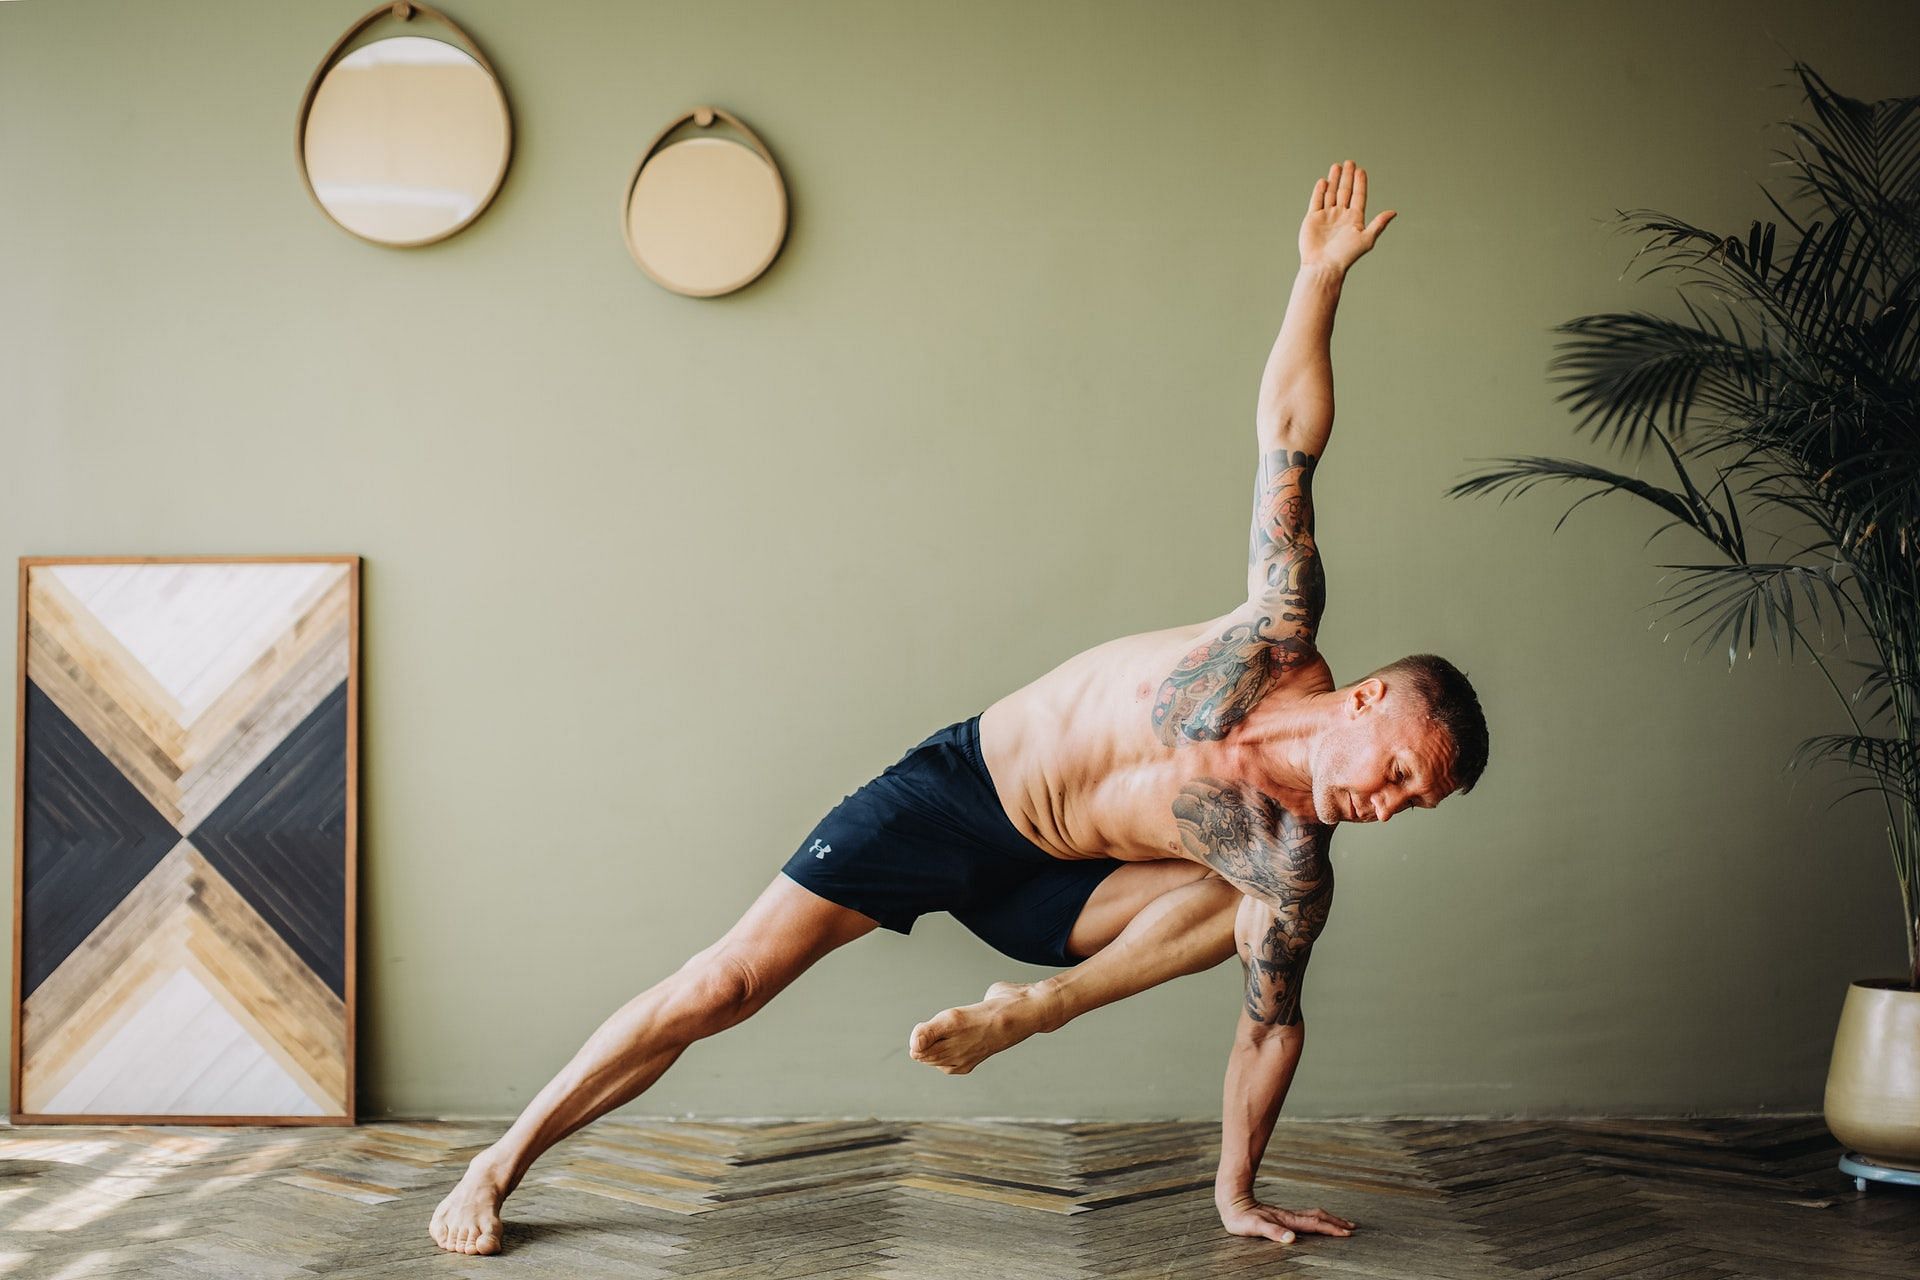 Yoga can be beneficial for athletes in several ways. (Photo by Elina Fairytale via pexels)